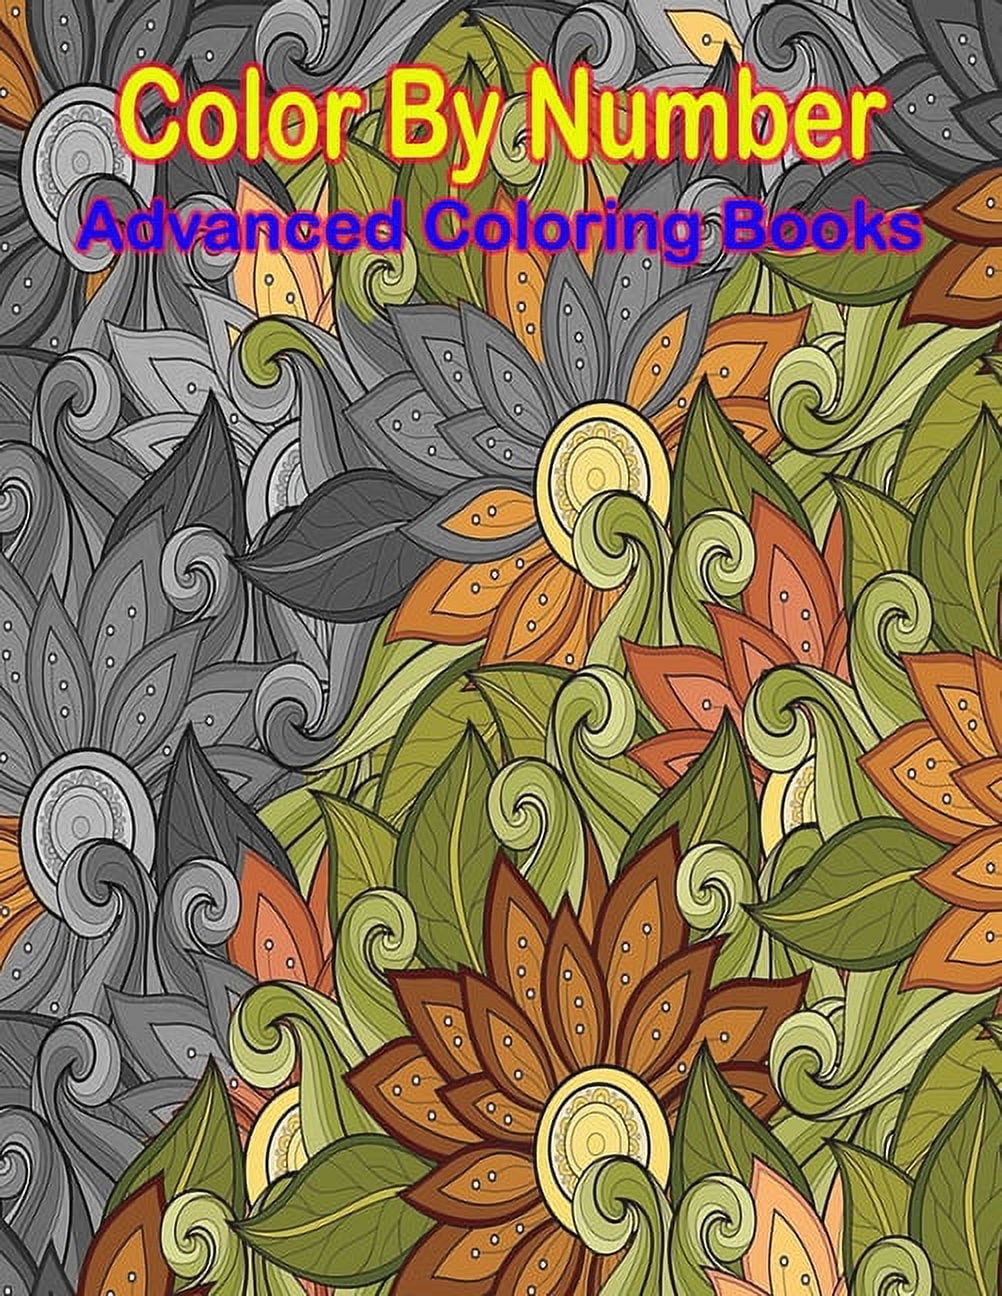 Color By Numbers Kids Ages 8-12: 50 Unique Color By Number Design for  drawing and coloring Stress Relieving Designs for Adults Relaxation  Creative hav (Paperback)